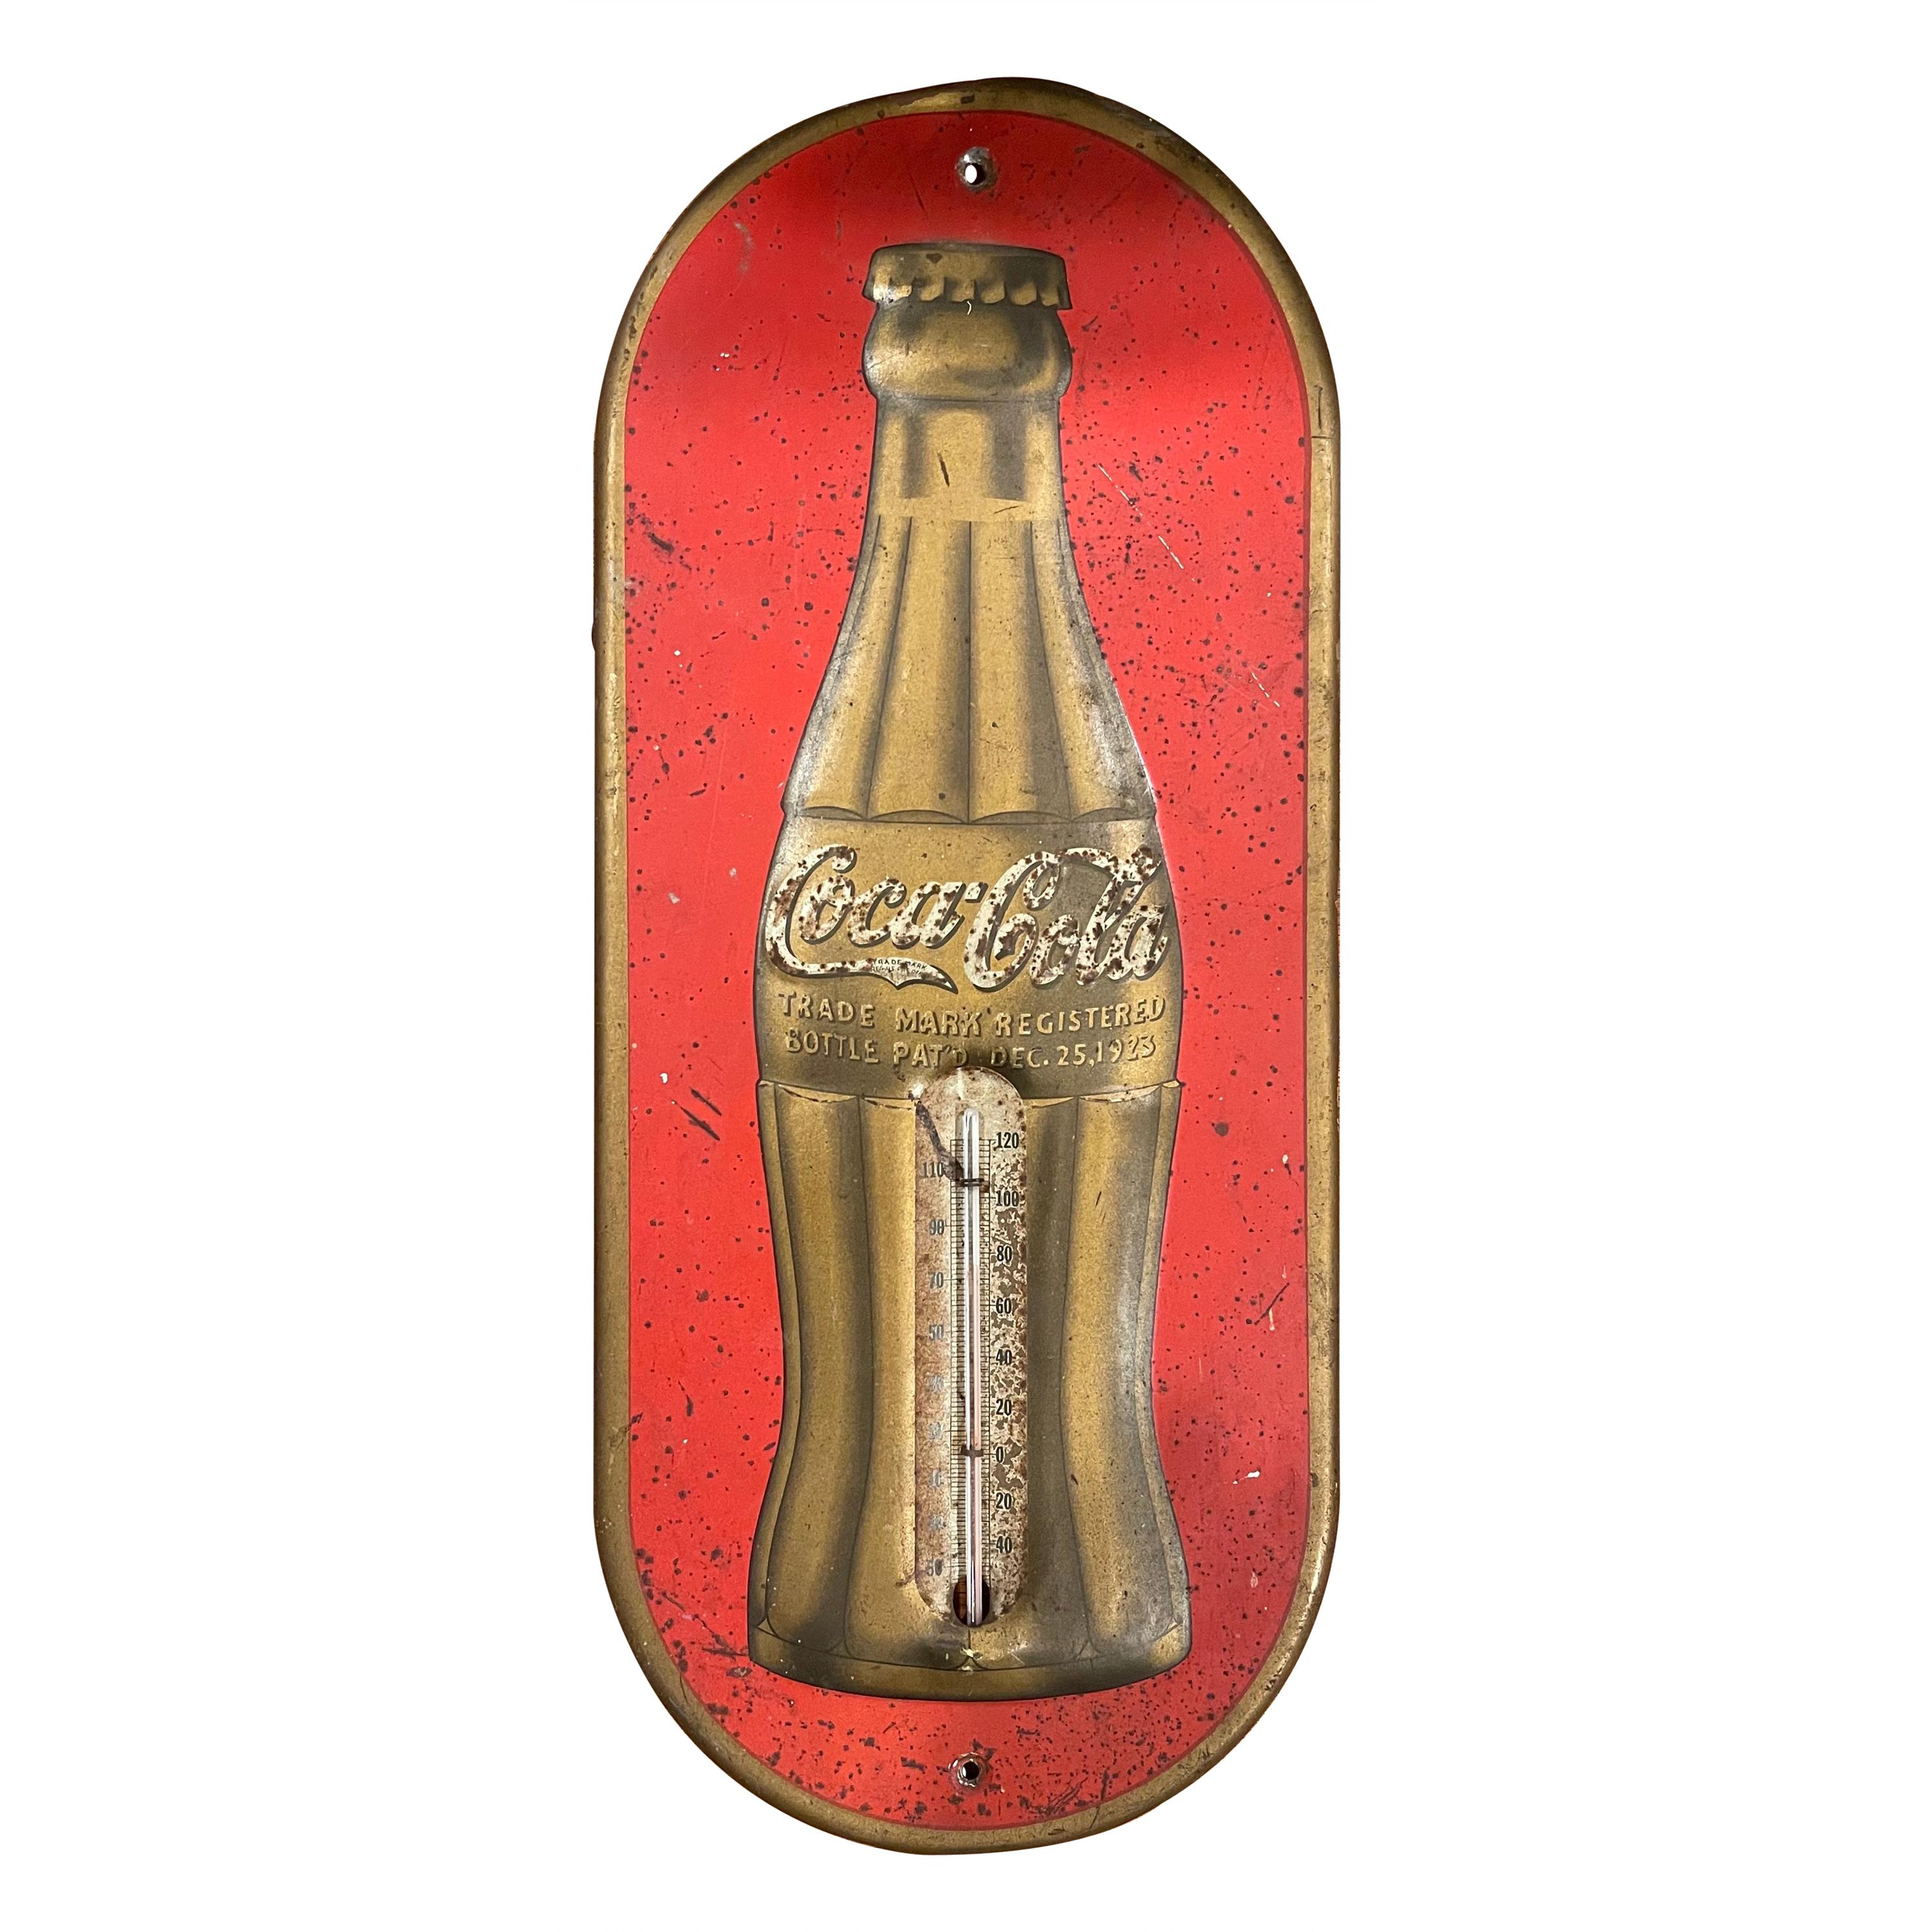 Coca Cola Anniversary Christmas Advertising Tin Sign  / Thermometer  1930s